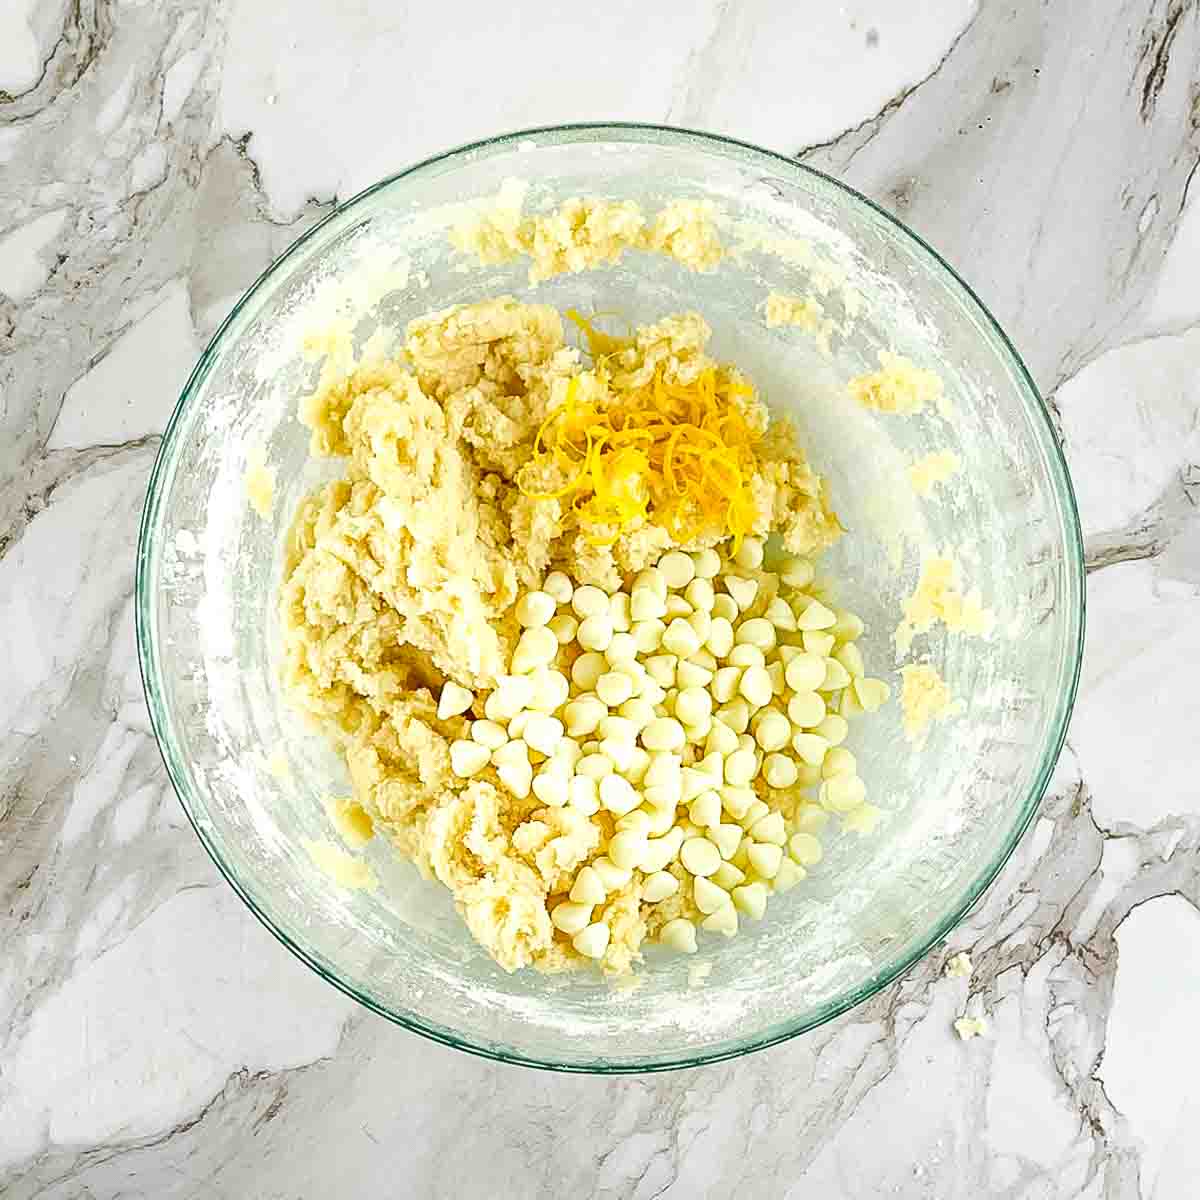 The ingredients combined in a glass mixing bowl, with the lemon zest and white chocolate chips added.